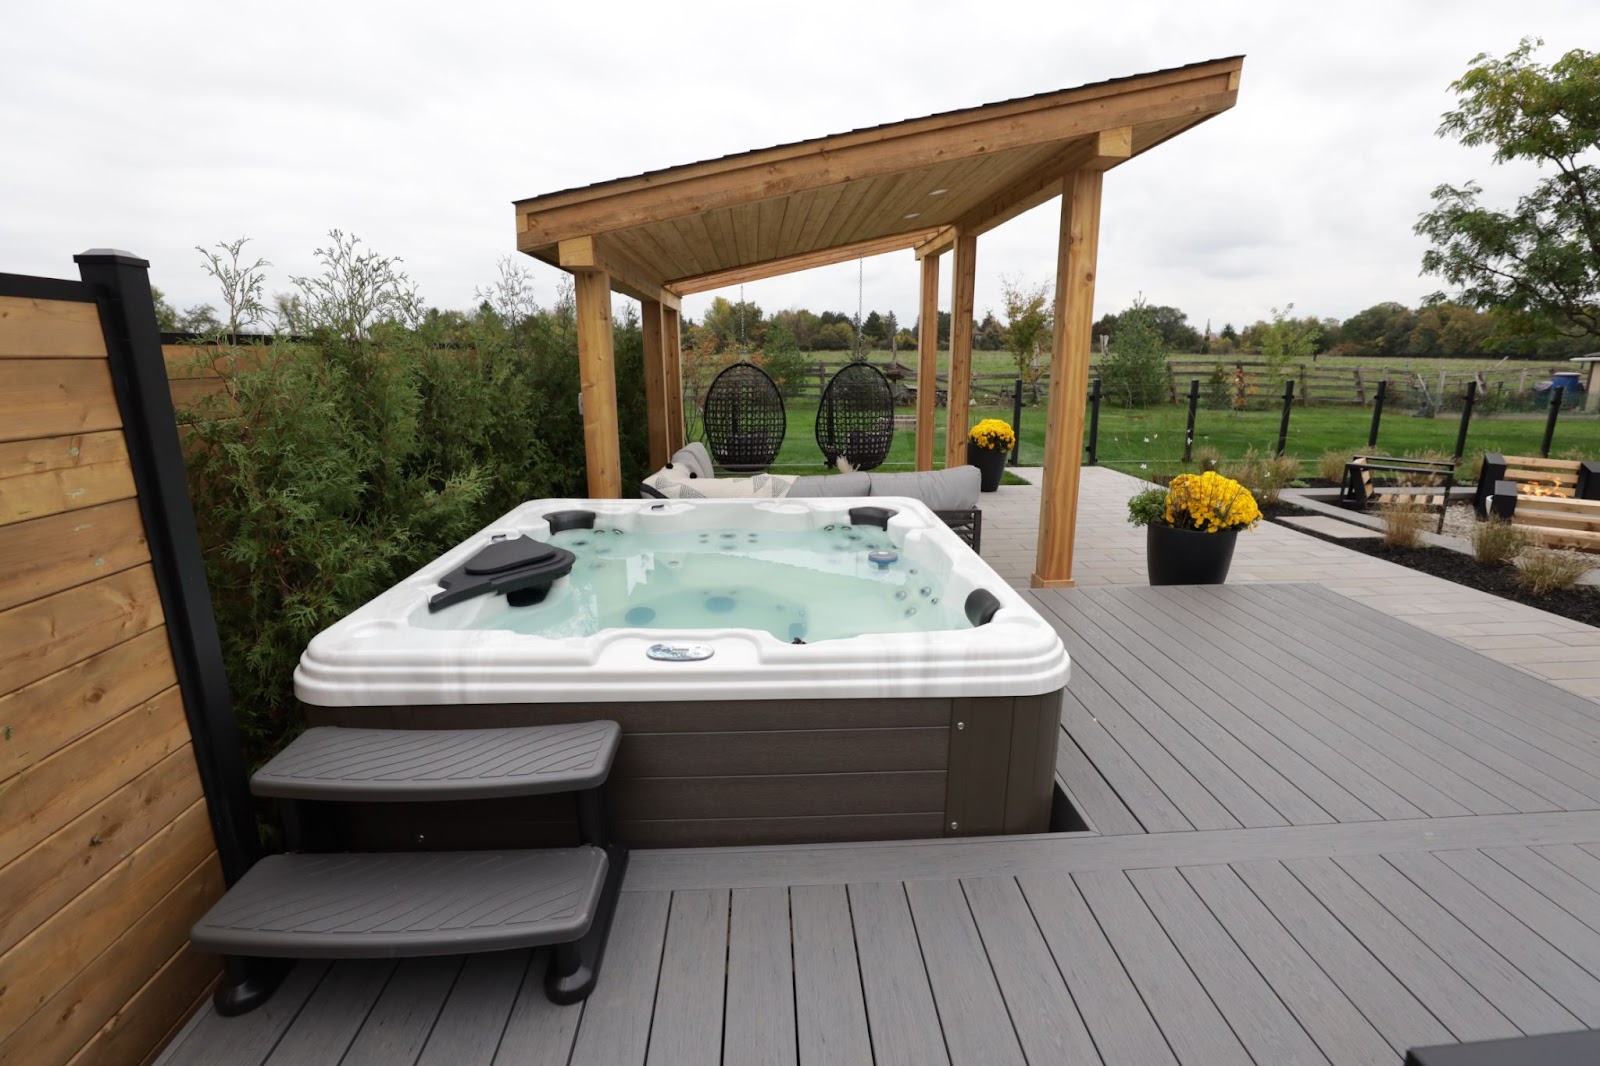 Image of Outdoor Backyard from Mike Holmes latest show Holmes Family Rescue, featuring Leisure Pools Hot Tub.